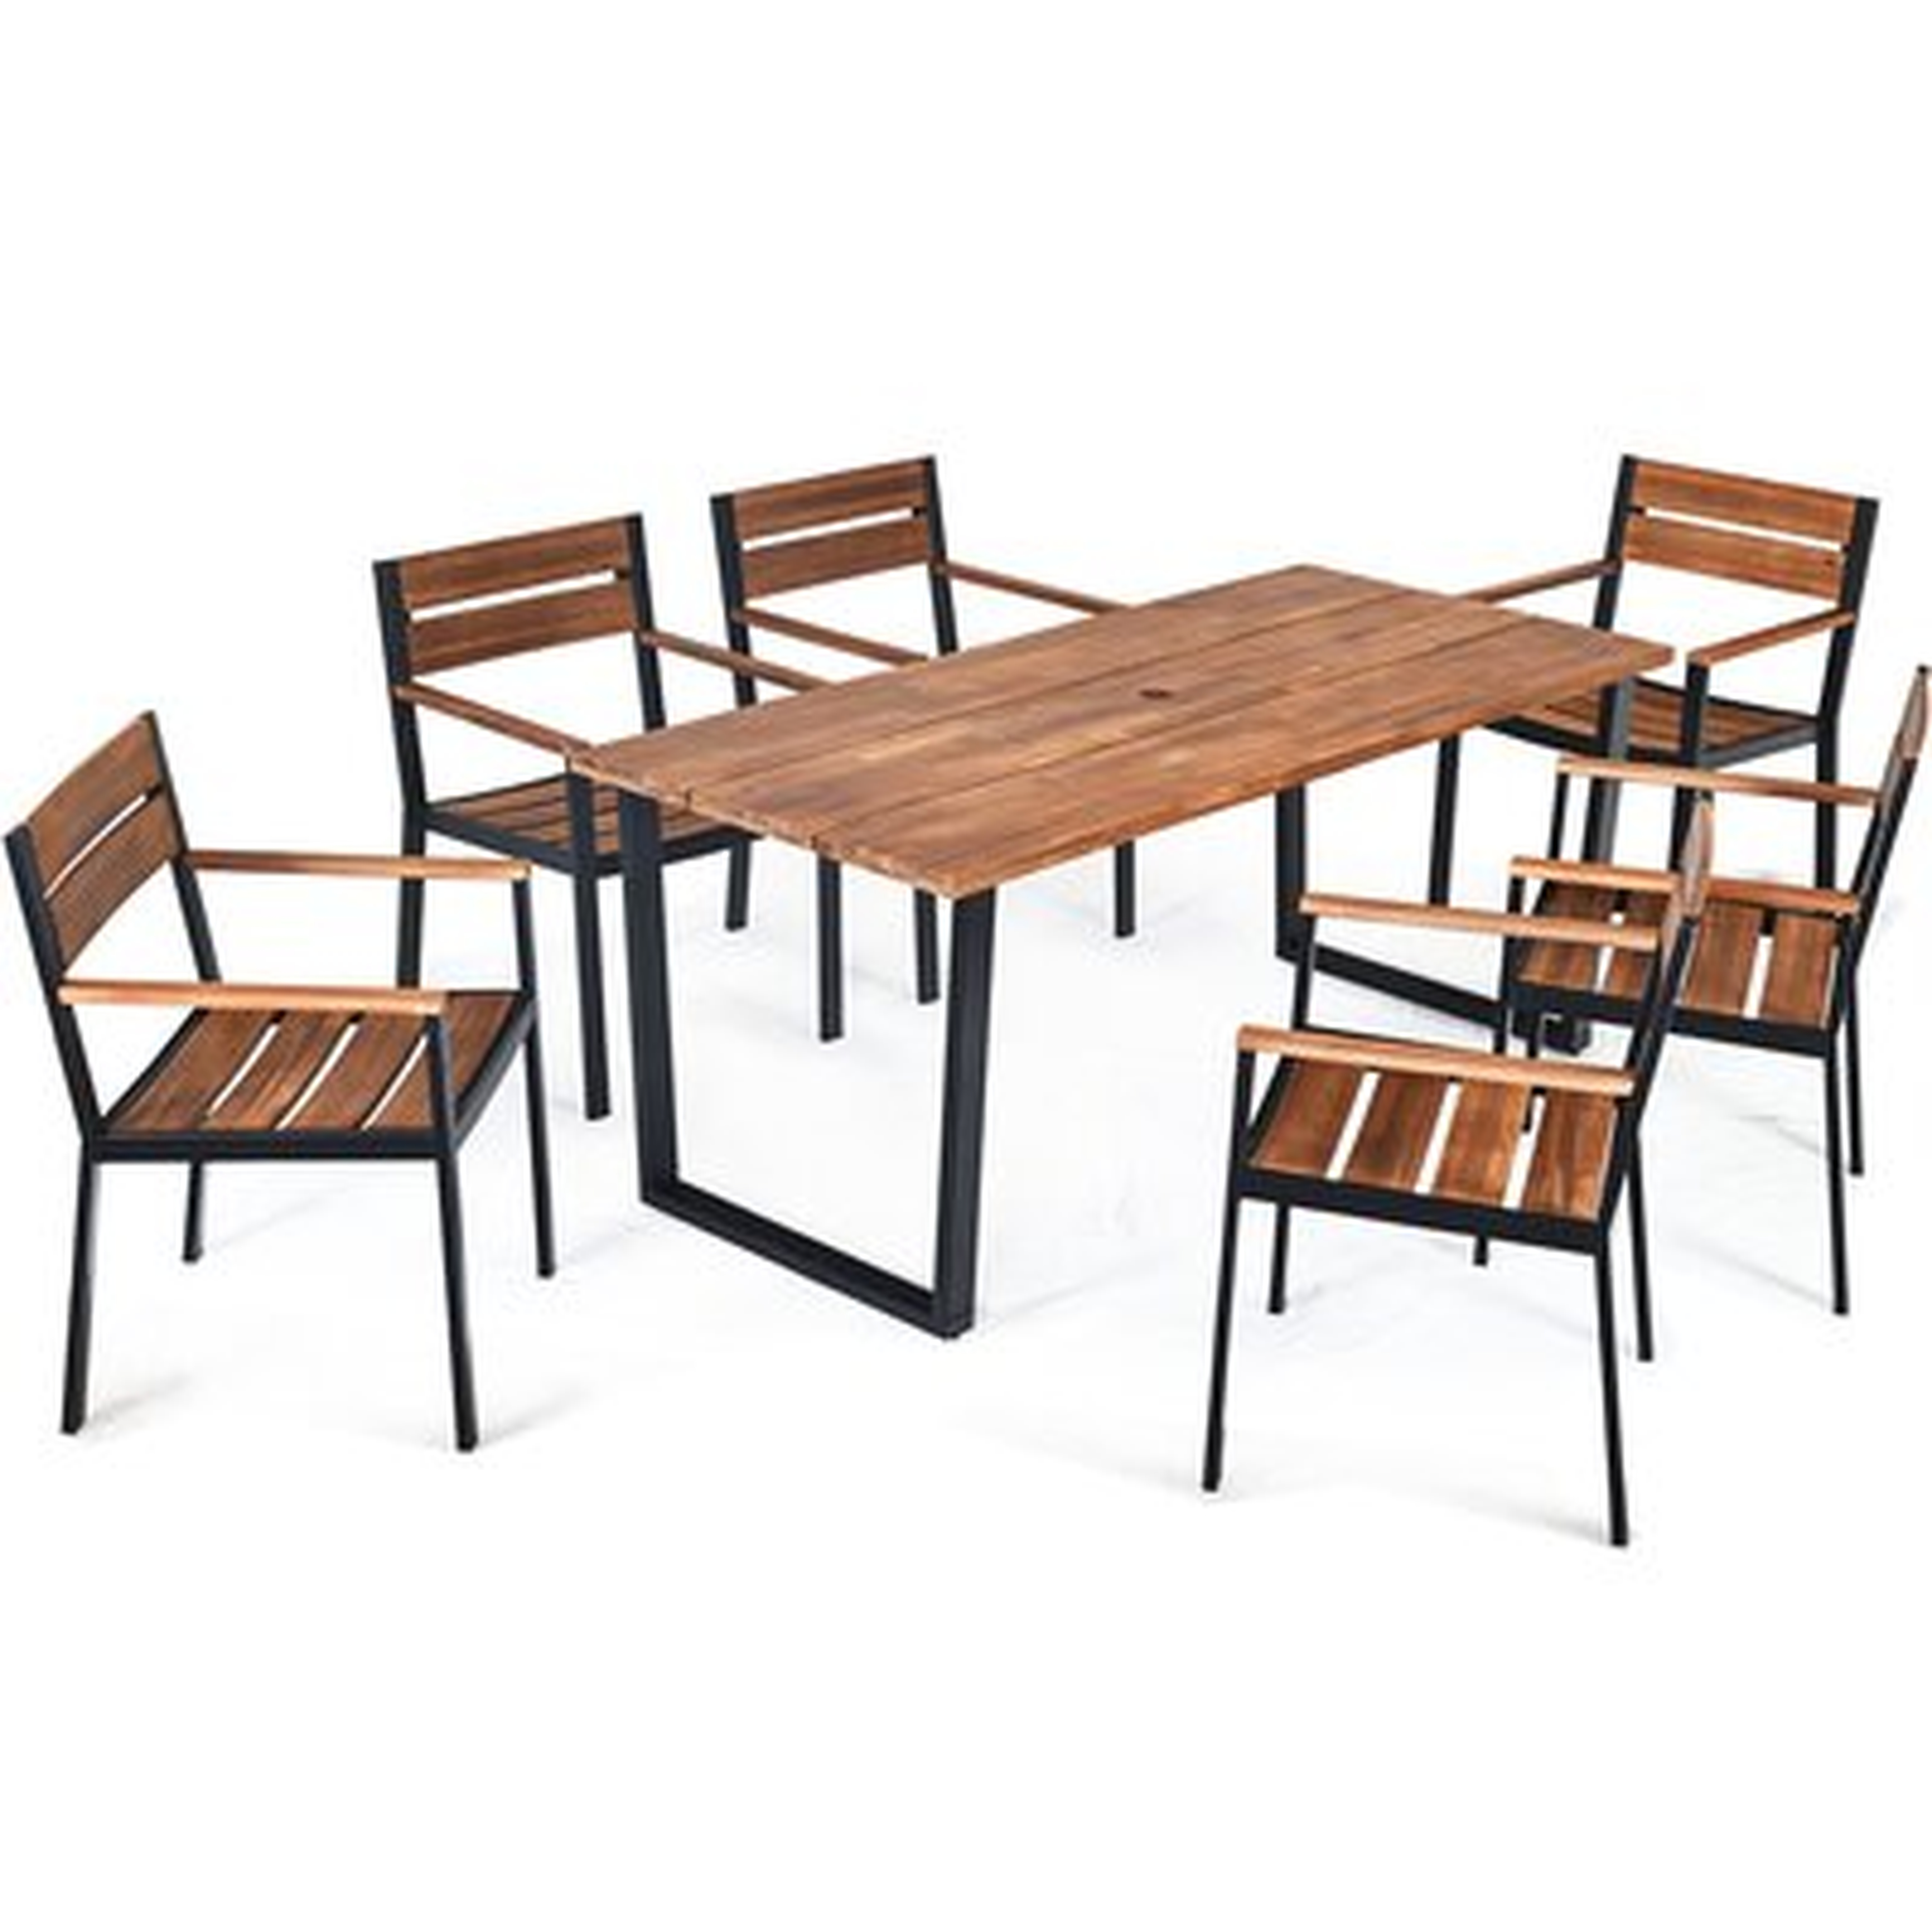 7 Pcs Outdoor Patio Dining Table Set With Hole - Wayfair